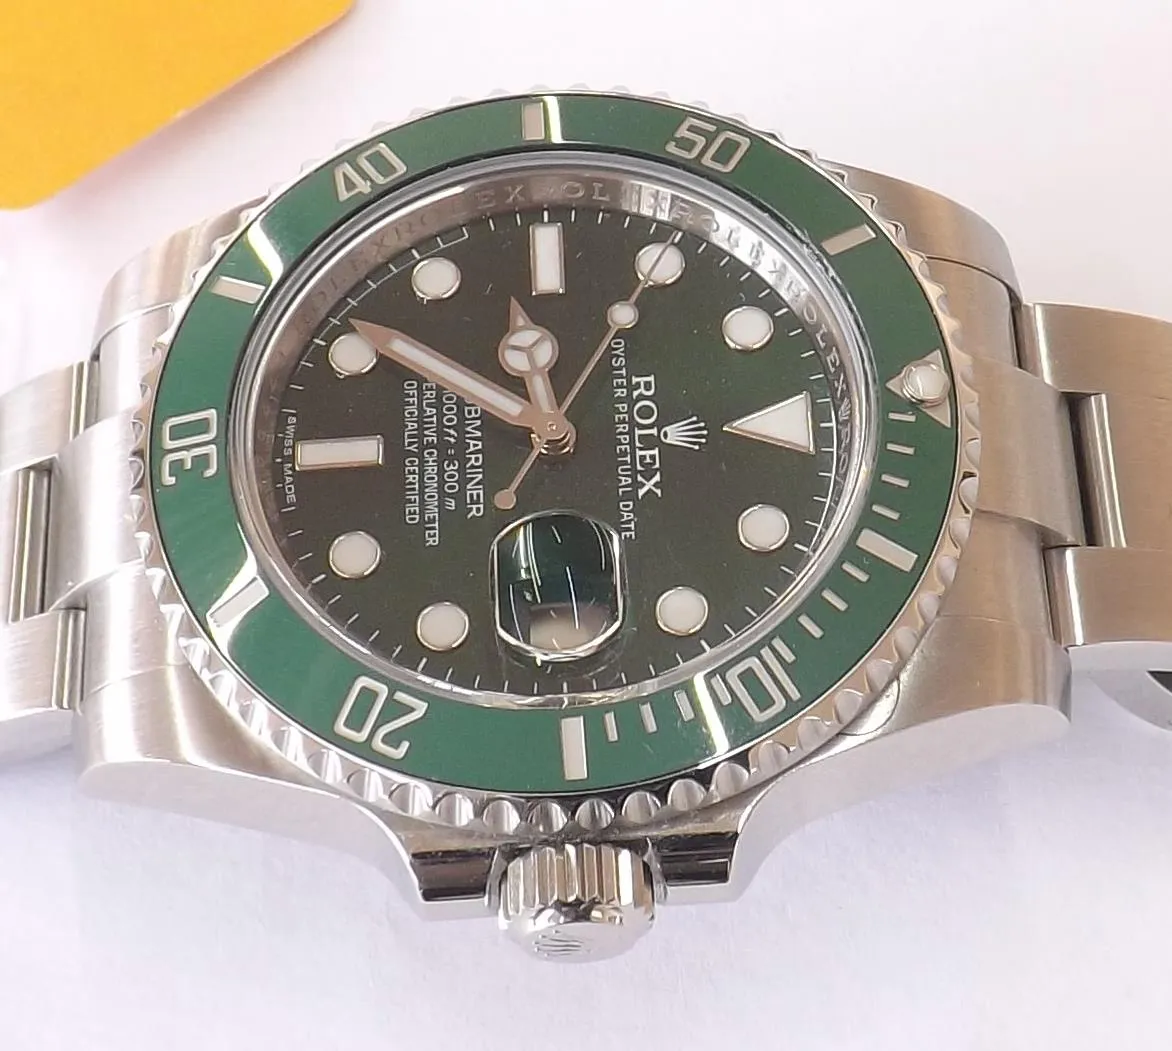 Rolex Submariner 116610LV 40mm Stainless steel and ceramic Green 9